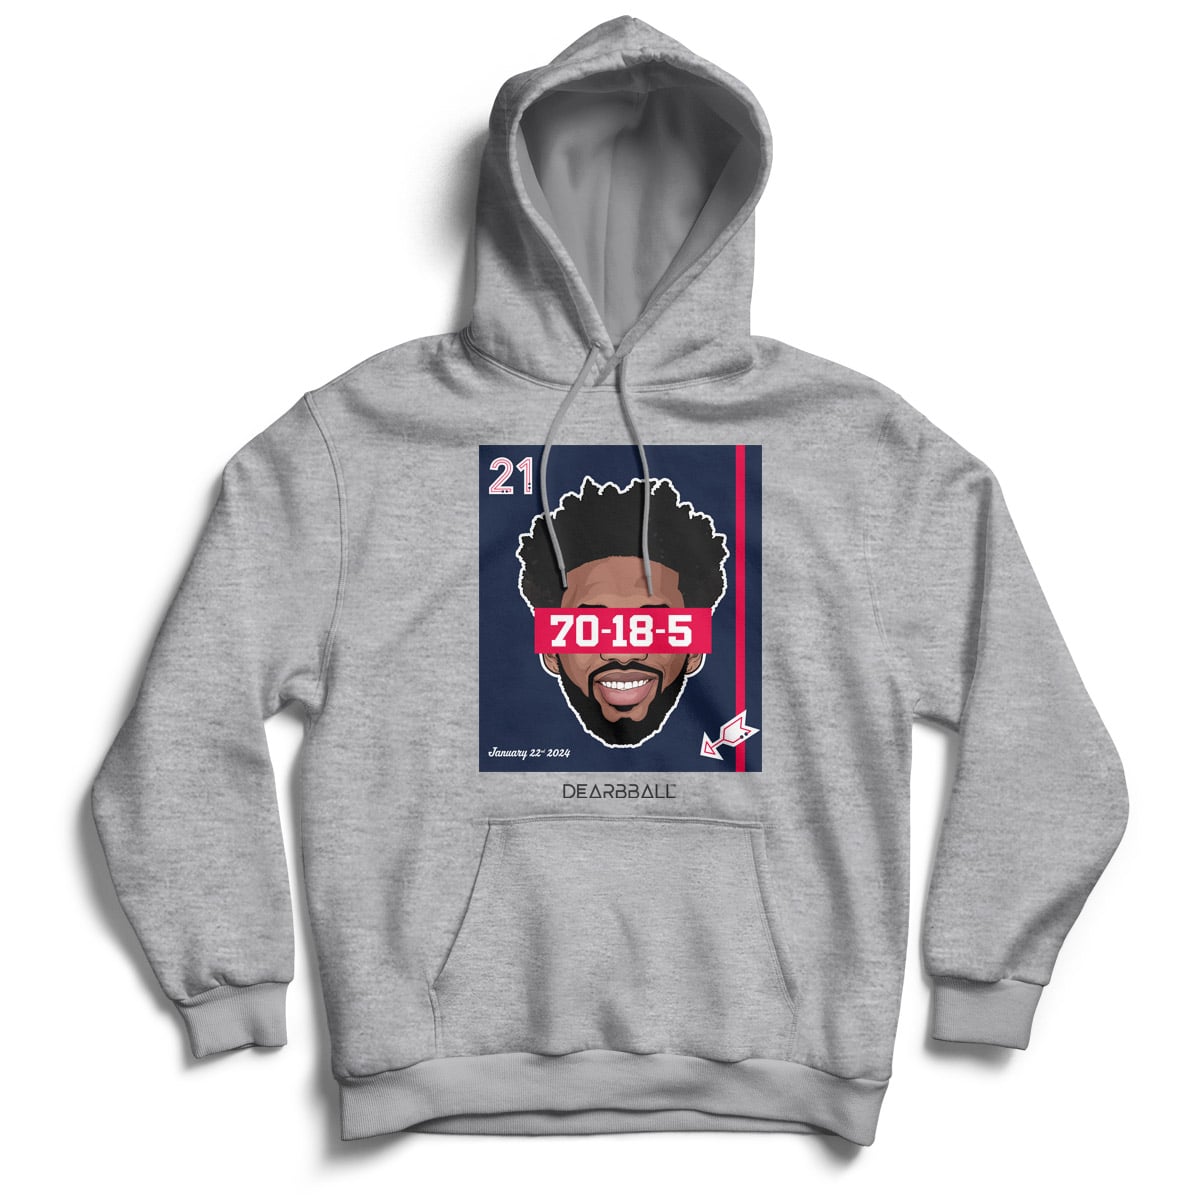 DearBBall Hoodie - Record Night 70 pts